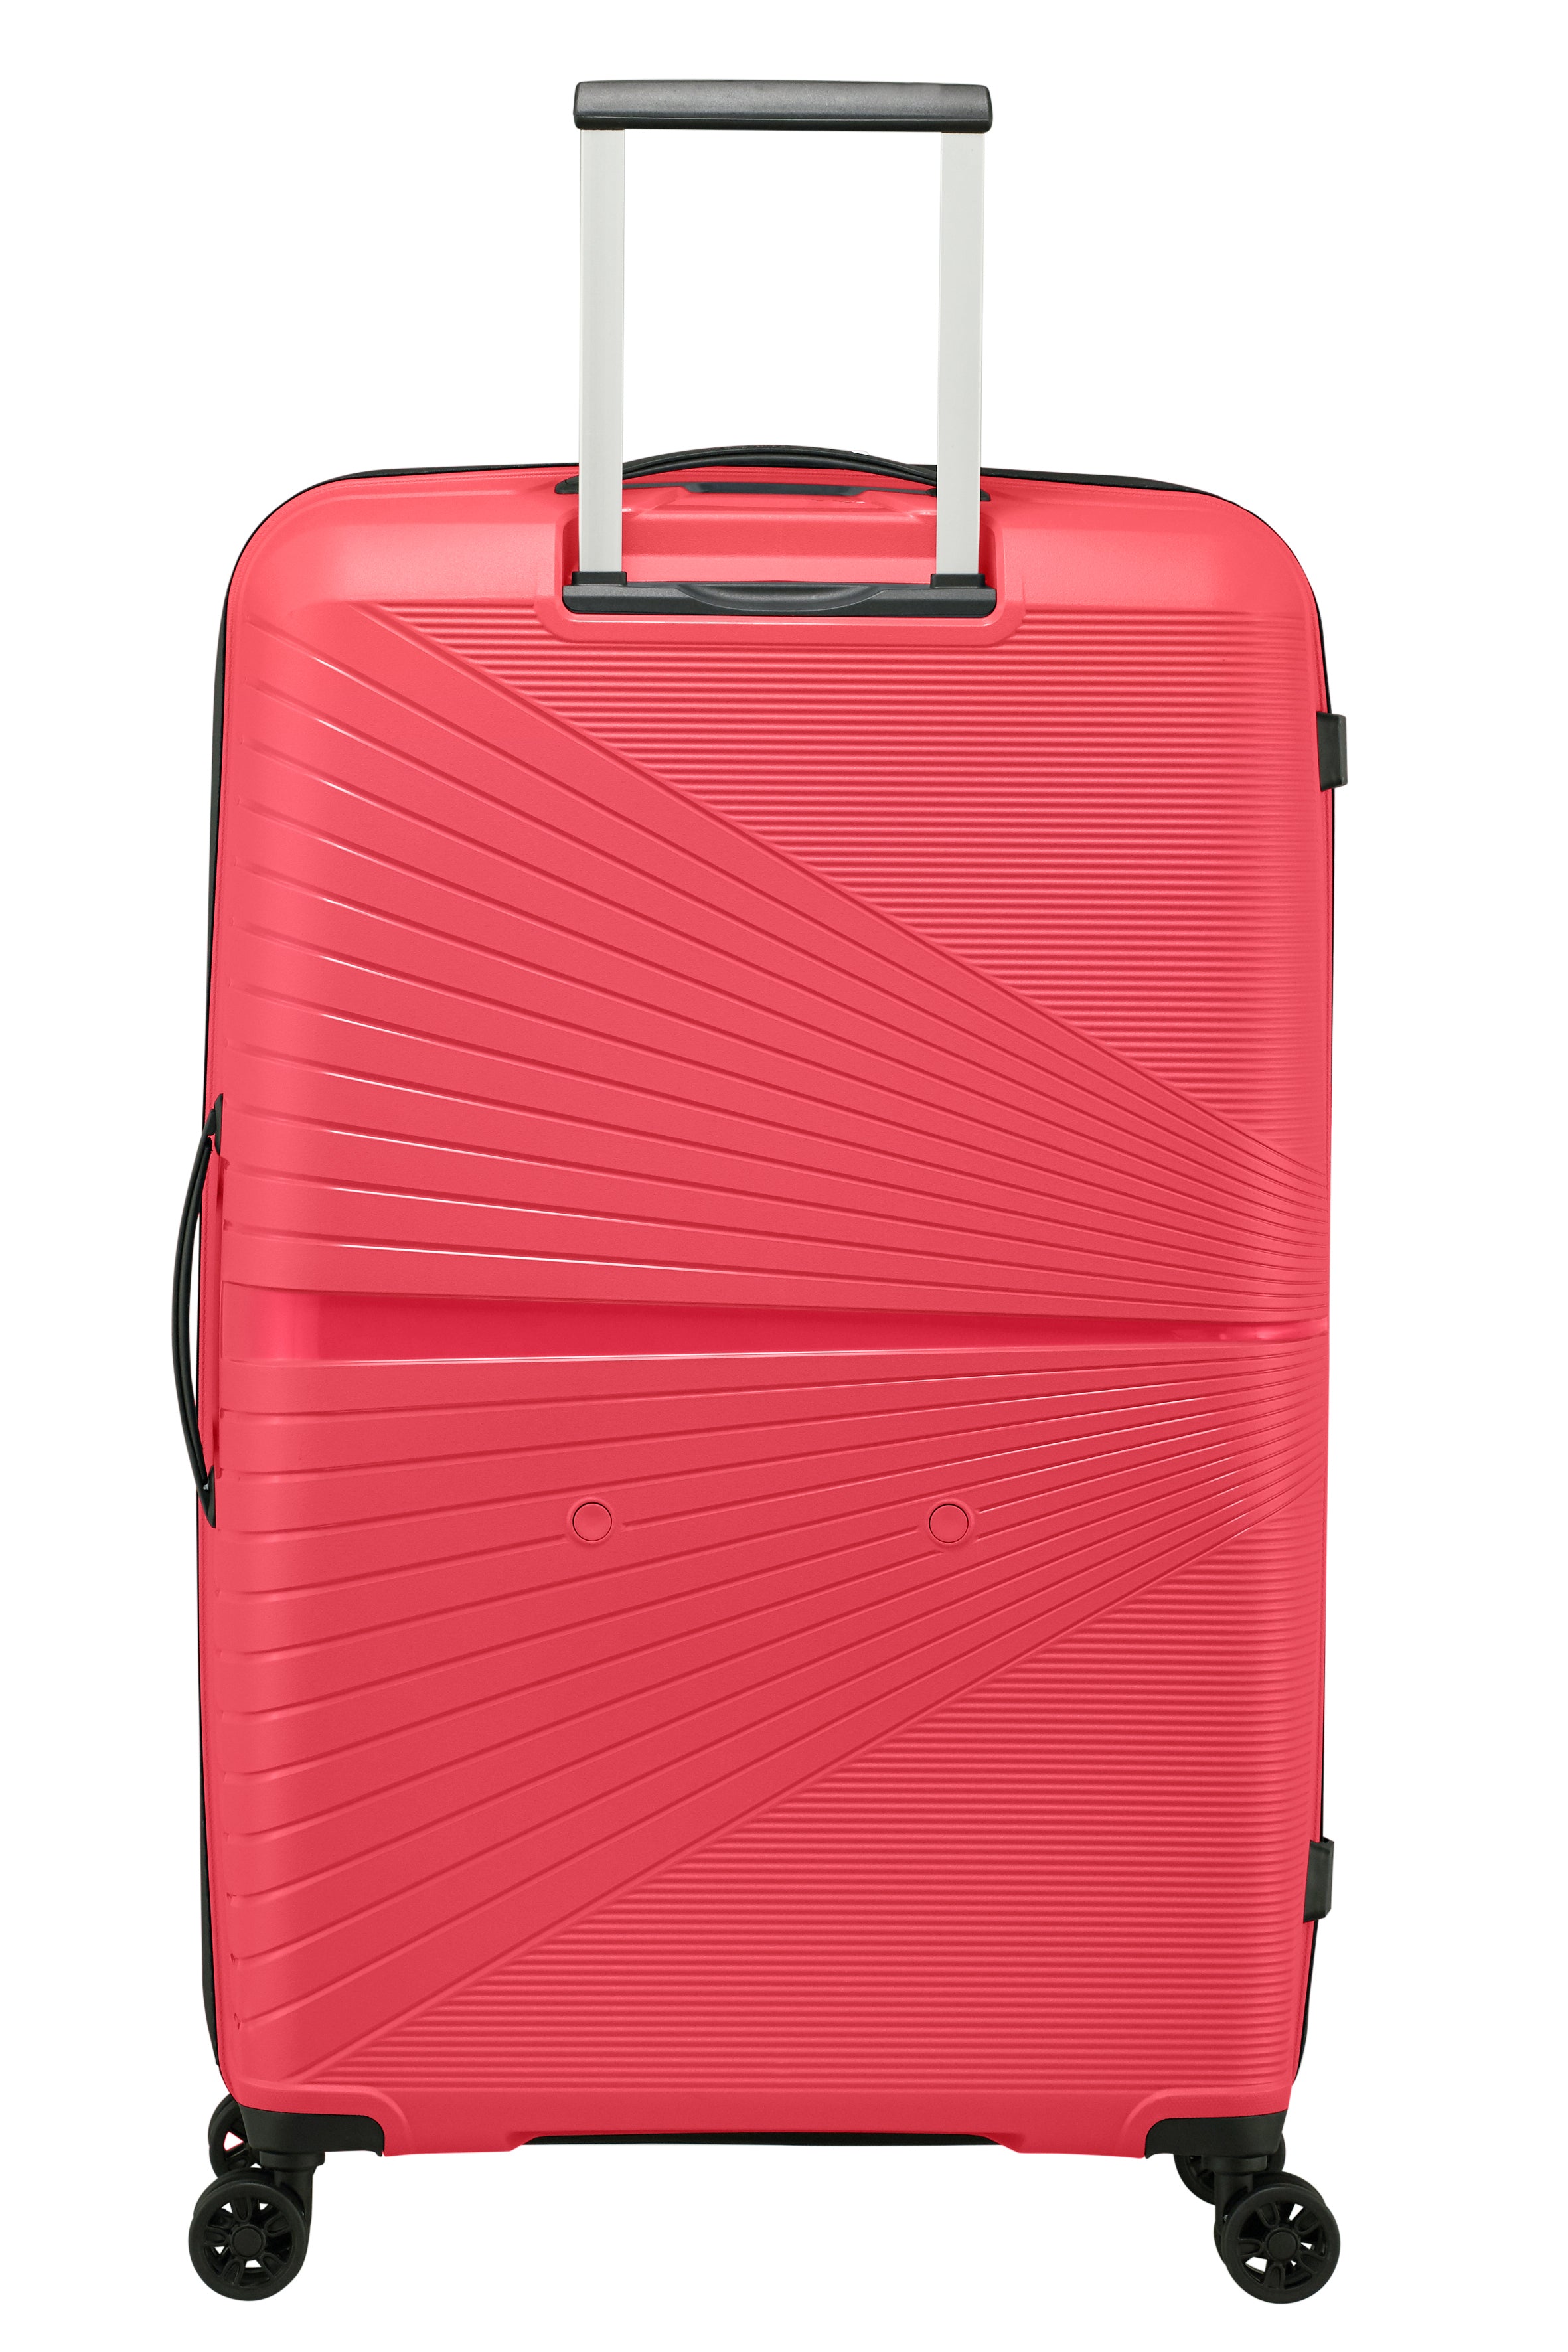 American Tourister - Airconic 77cm Large 4 Wheel Hard Suitcase - Paradise Pink-3